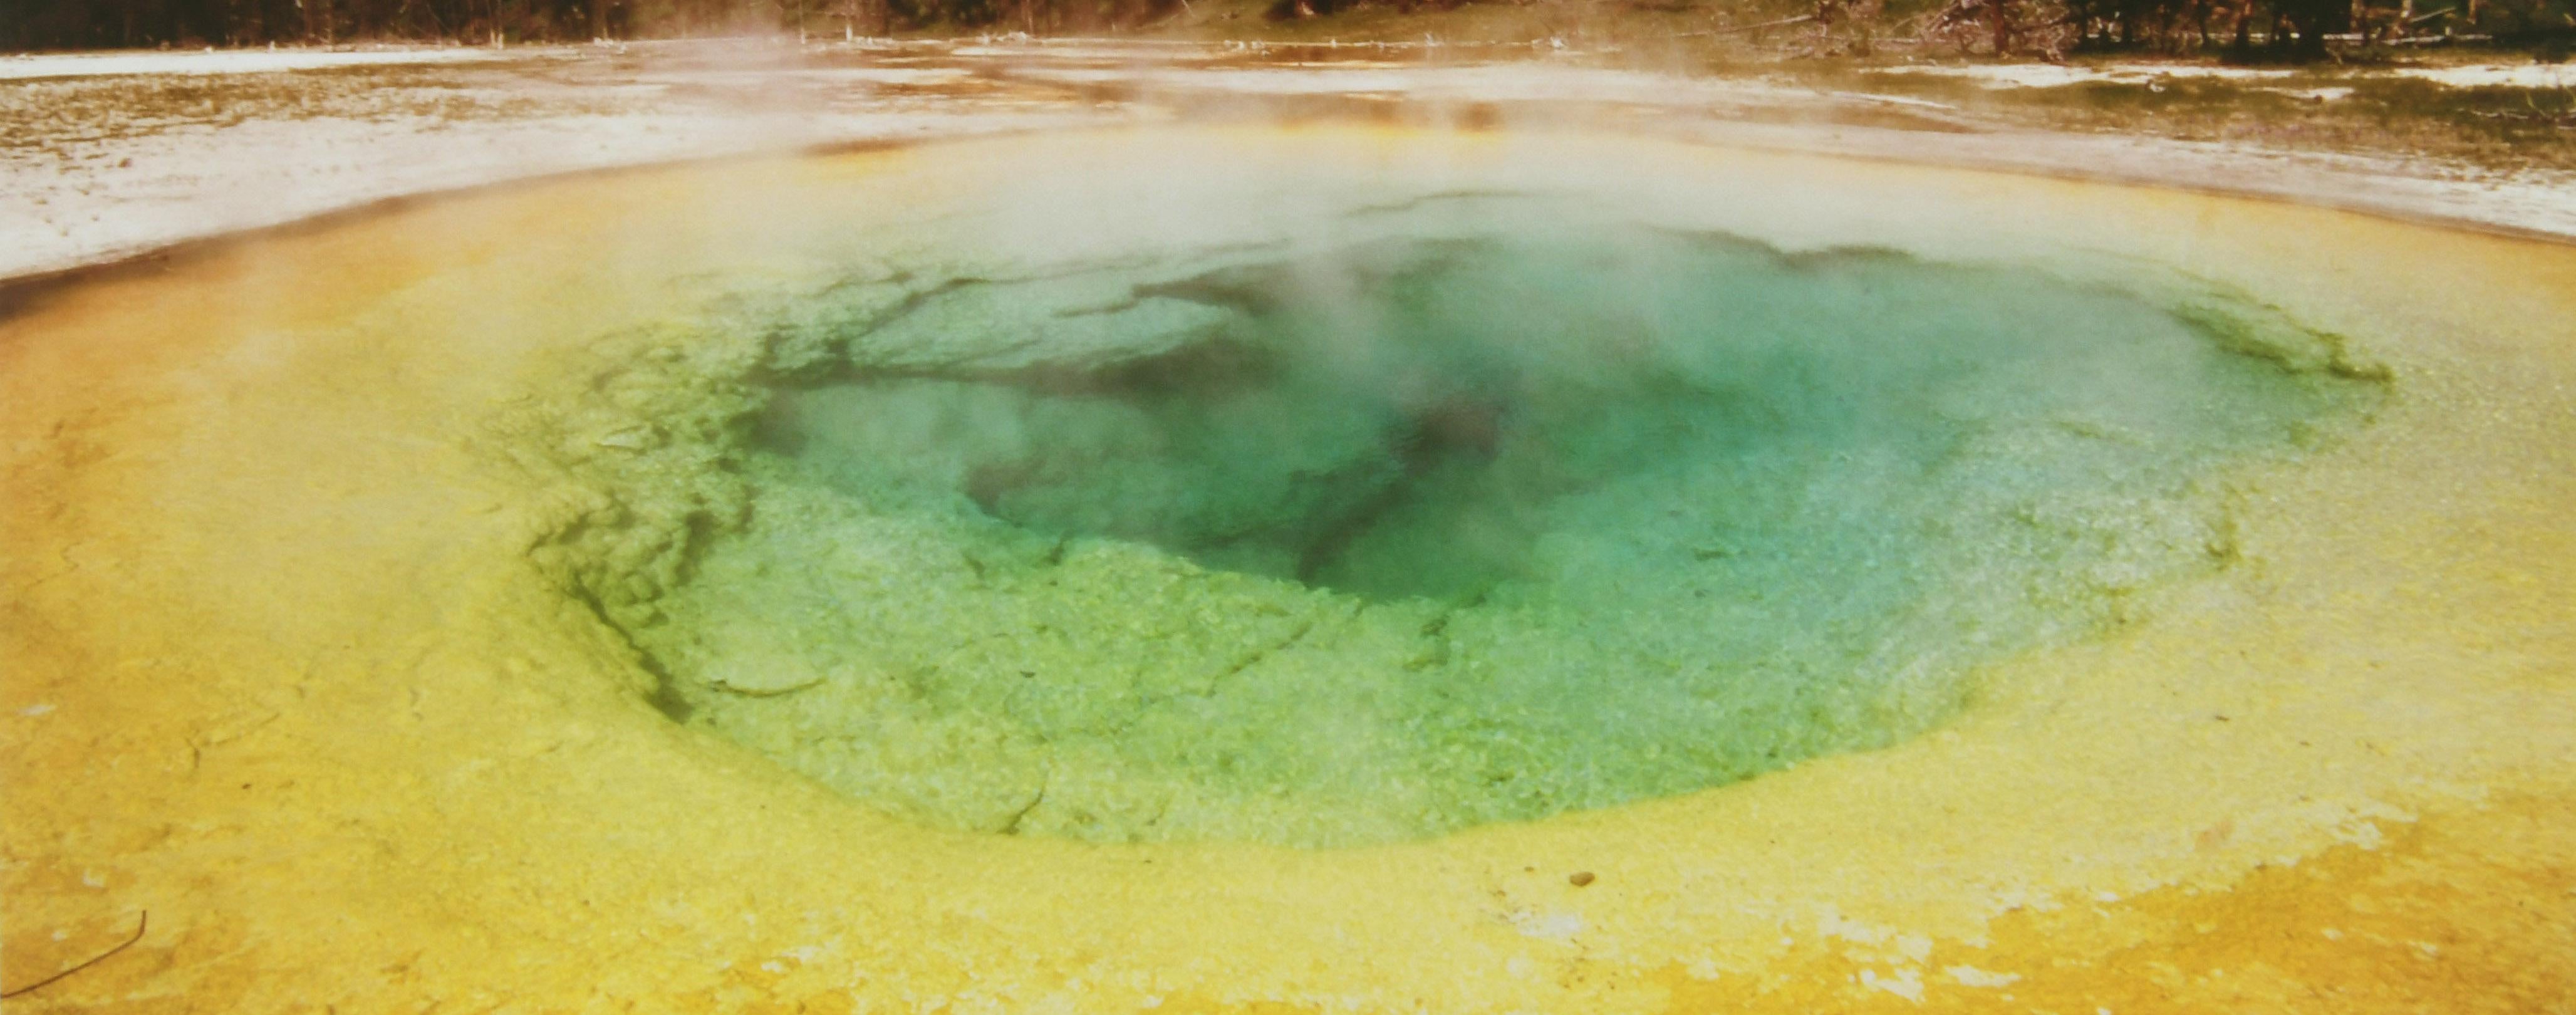 Morning Glory Pool, Yellowstone - Contemporary Photograph by Westgate, Colin